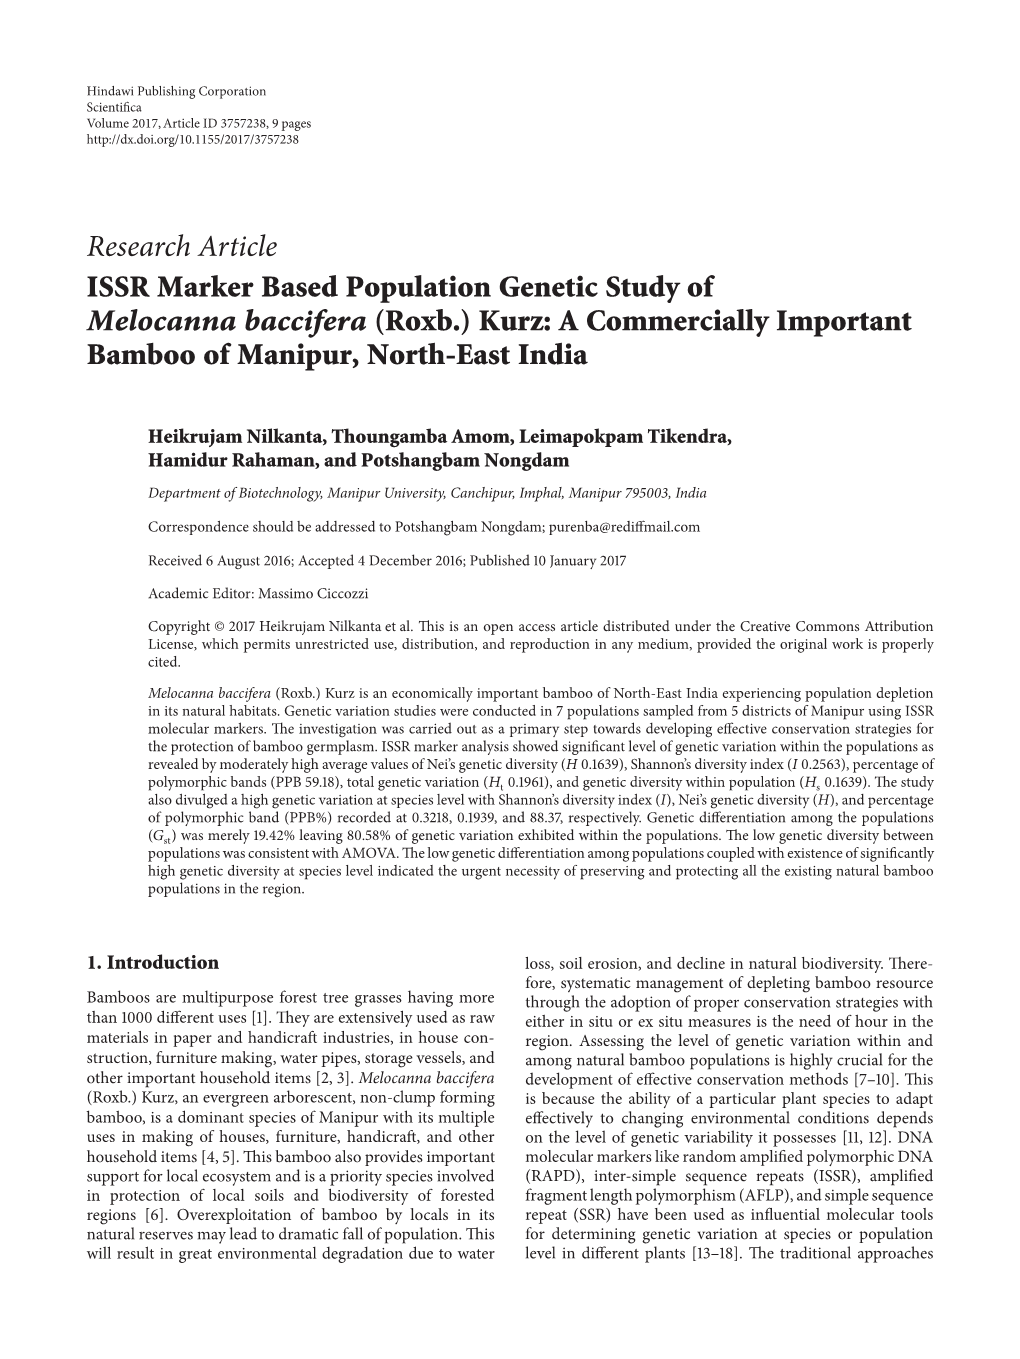 Research Article ISSR Marker Based Population Genetic Study of Melocanna Baccifera (Roxb.) Kurz: a Commercially Important Bamboo of Manipur, North-East India